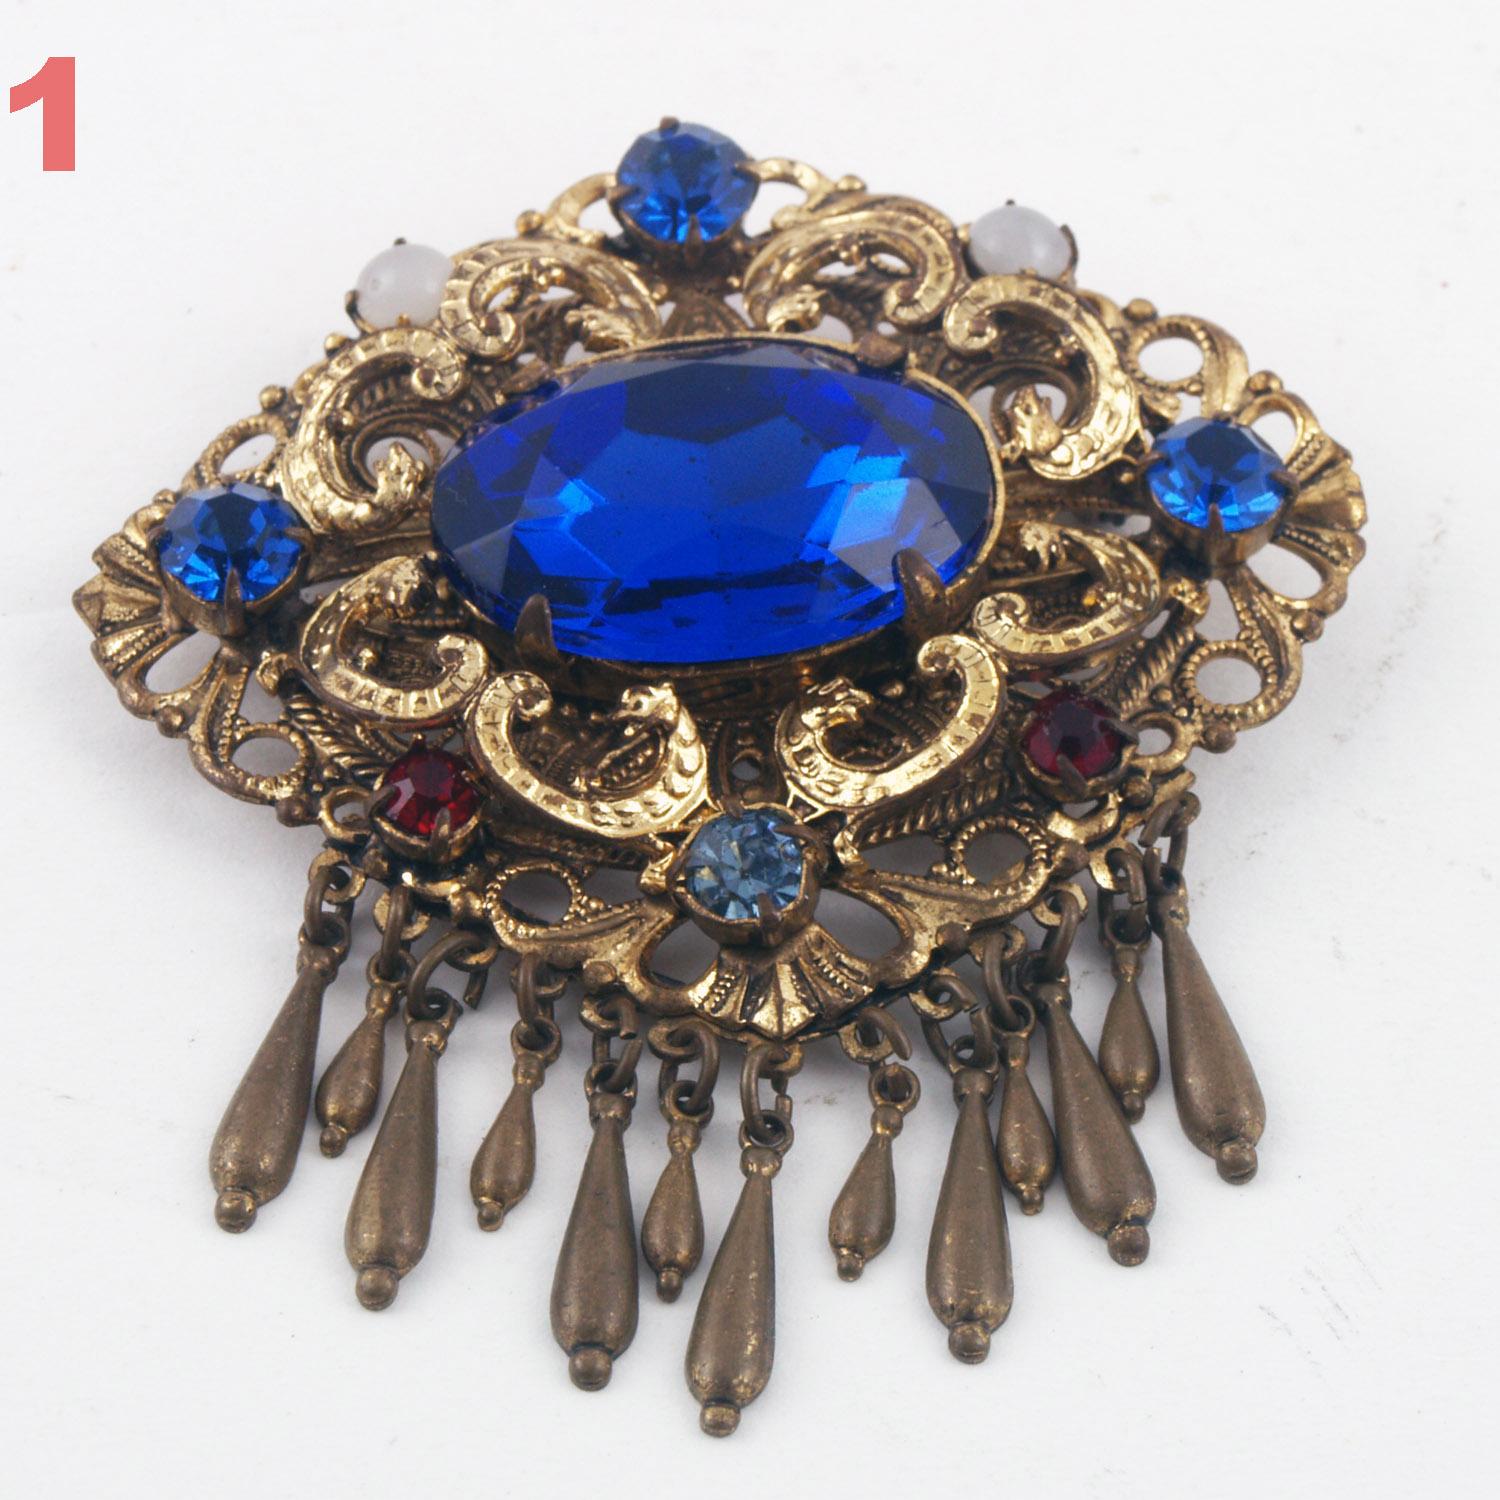 Early 20th century, pins or grandma's brooches, Art Nouveau, hard stones, pearls, zircons, colored crystal worked as diamond, mounted on gold metal or filigree; attachment needle with security.
Of great charm, brilliant, all in good condition and